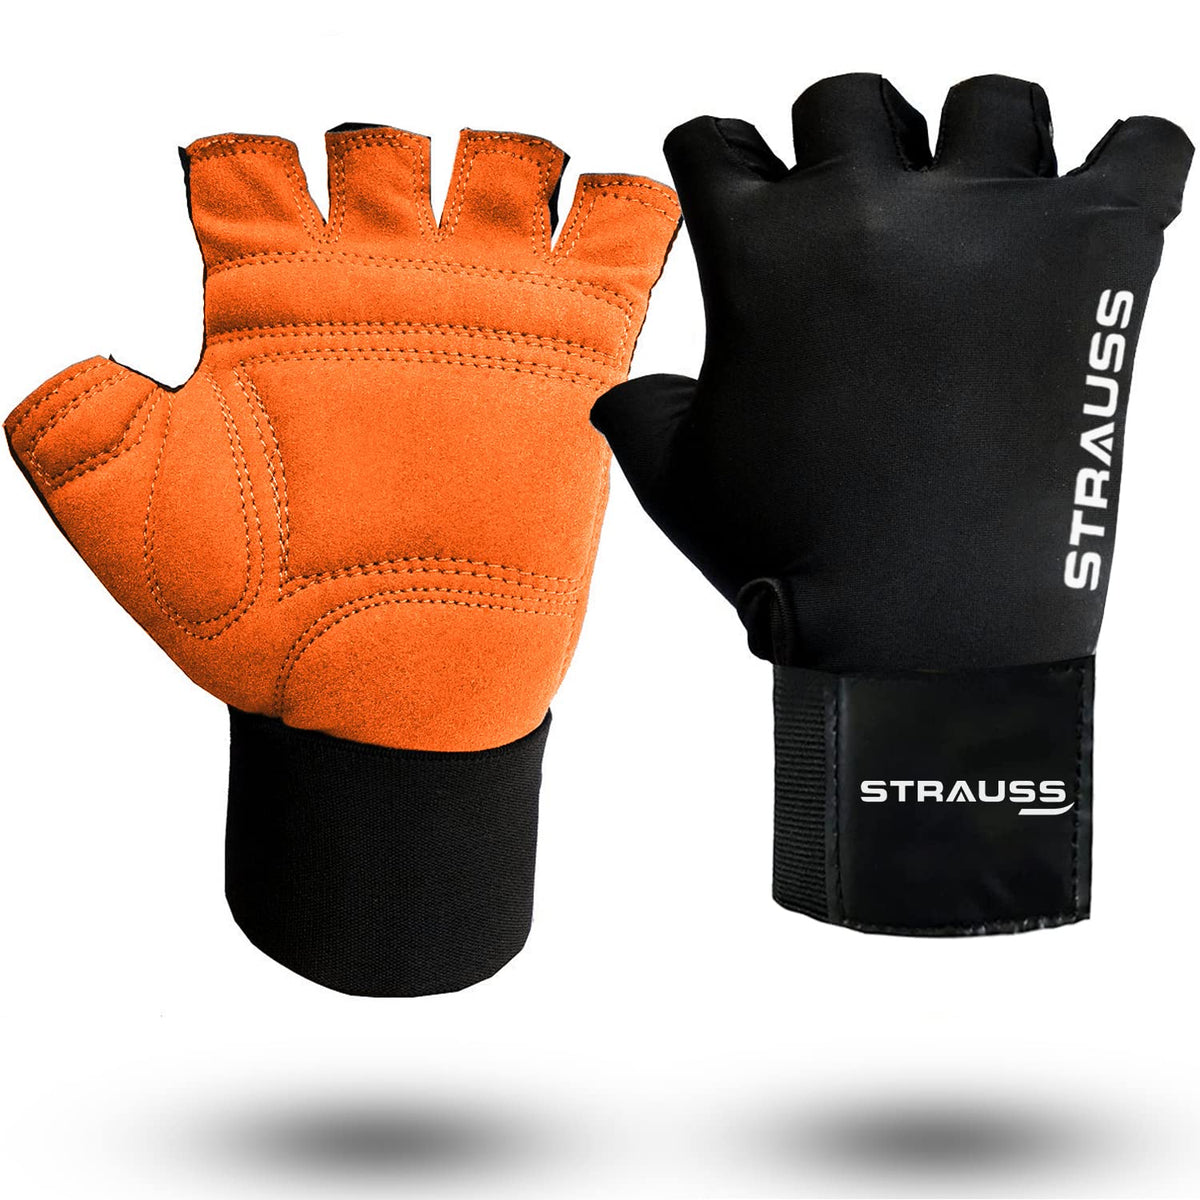 STRAUSS Suede Gym Gloves for Weightlifting, Training, Cycling, Exercise & Gym | Half Finger Design, 8mm Foam Cushioning, Anti-Slip & Breathable Lycra Material, (Black), (Extra Large)